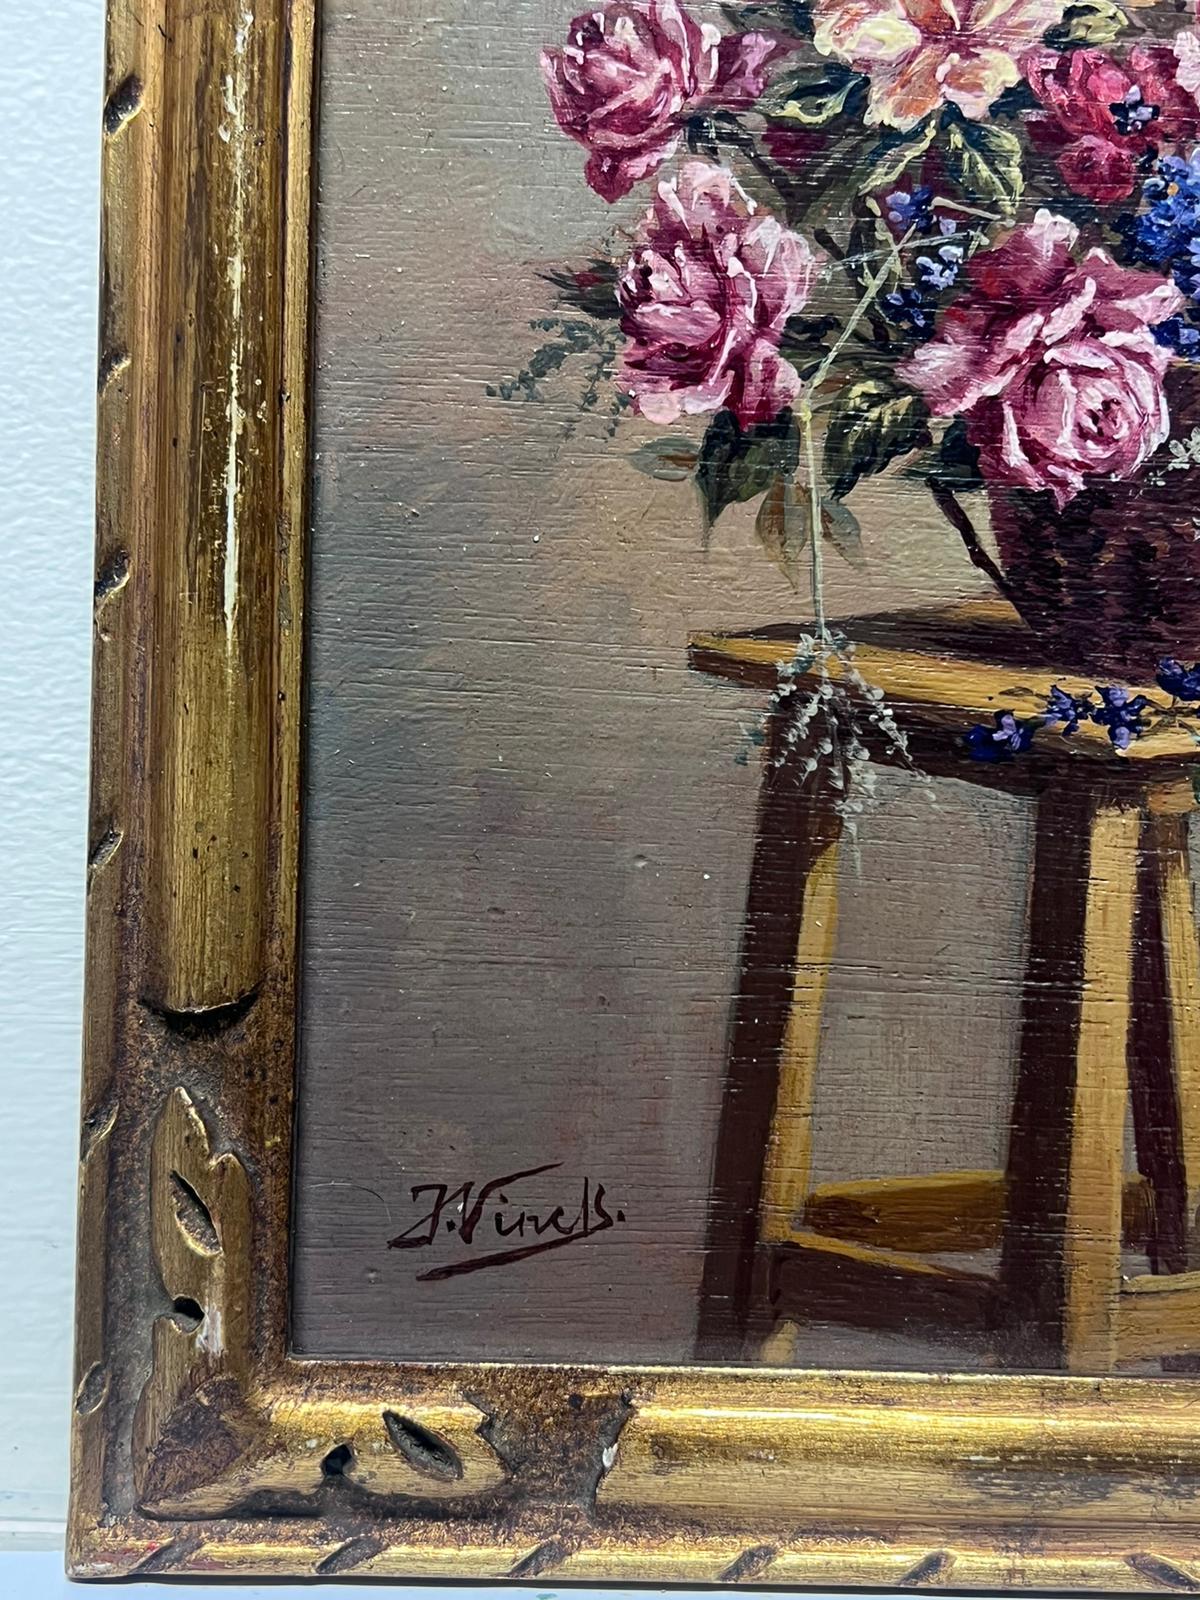 Still Life of Roses
by Joseph Vinck (French 1900-1979)
signed oil on board, framed
framed: 10 x 8 inches
board: 9 x 6 inches
provenance: private collection
condition: very good and sound condition